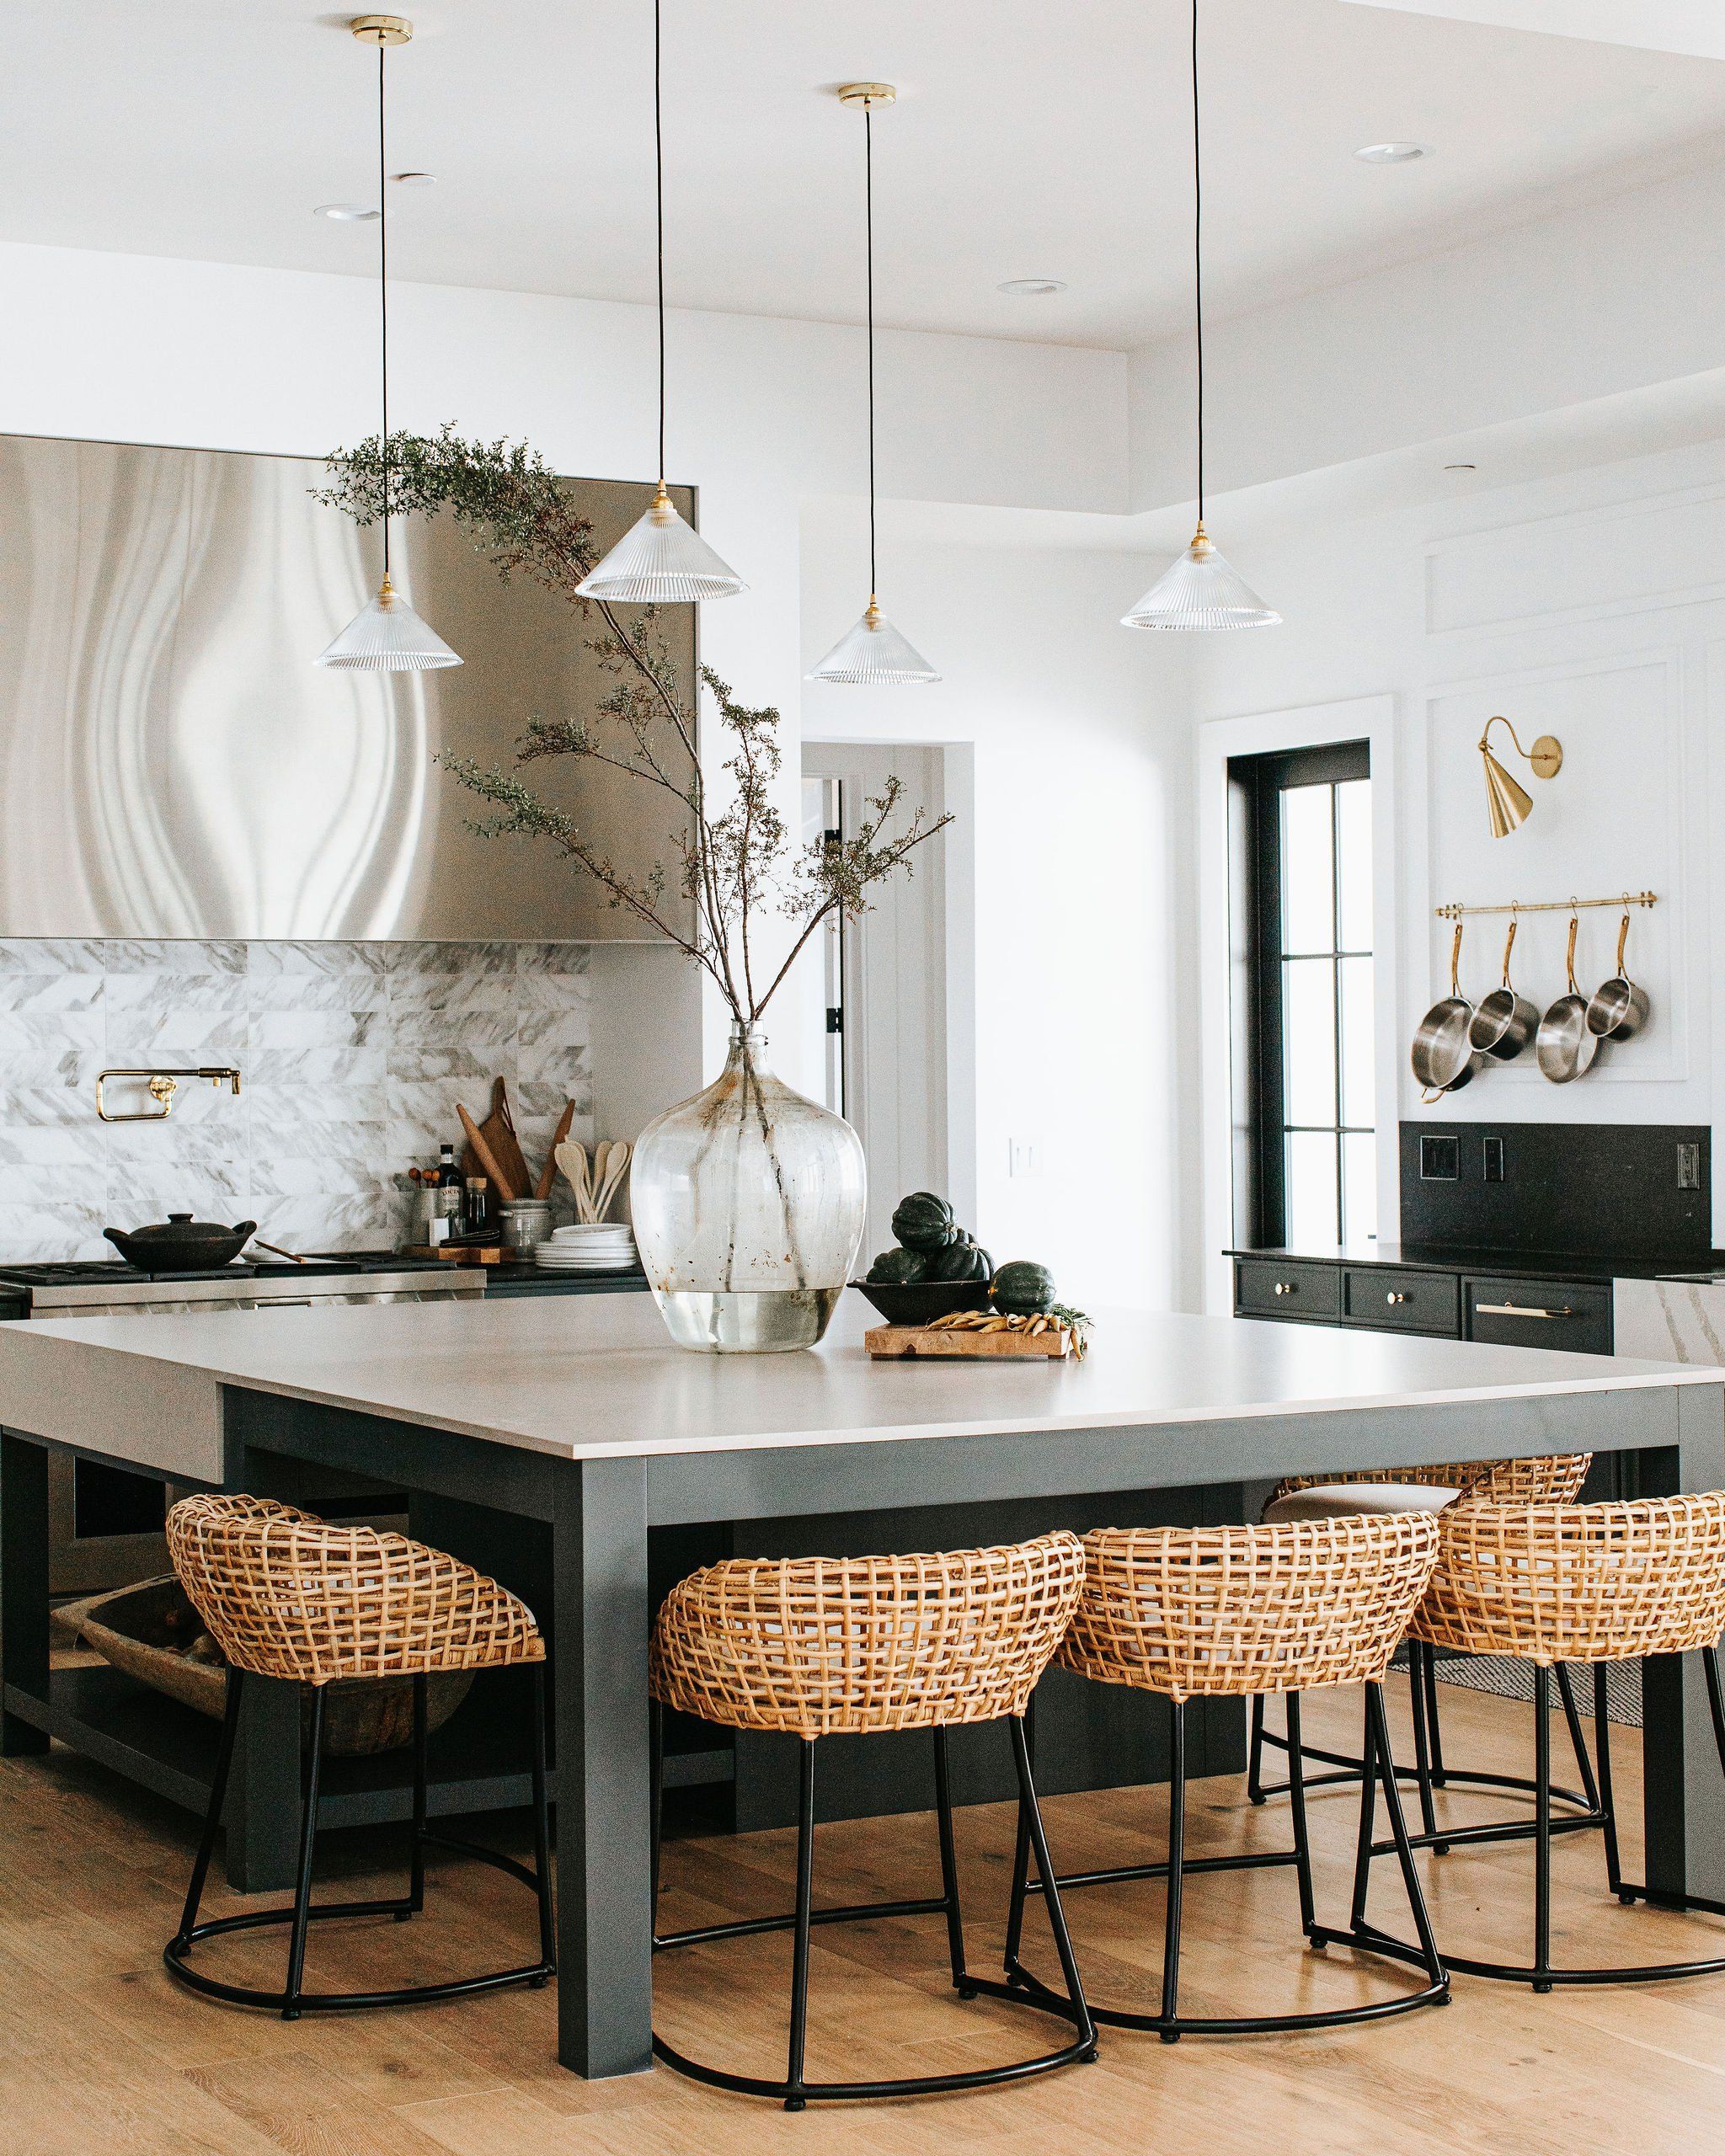 Create a large kitchen island for
  yourself